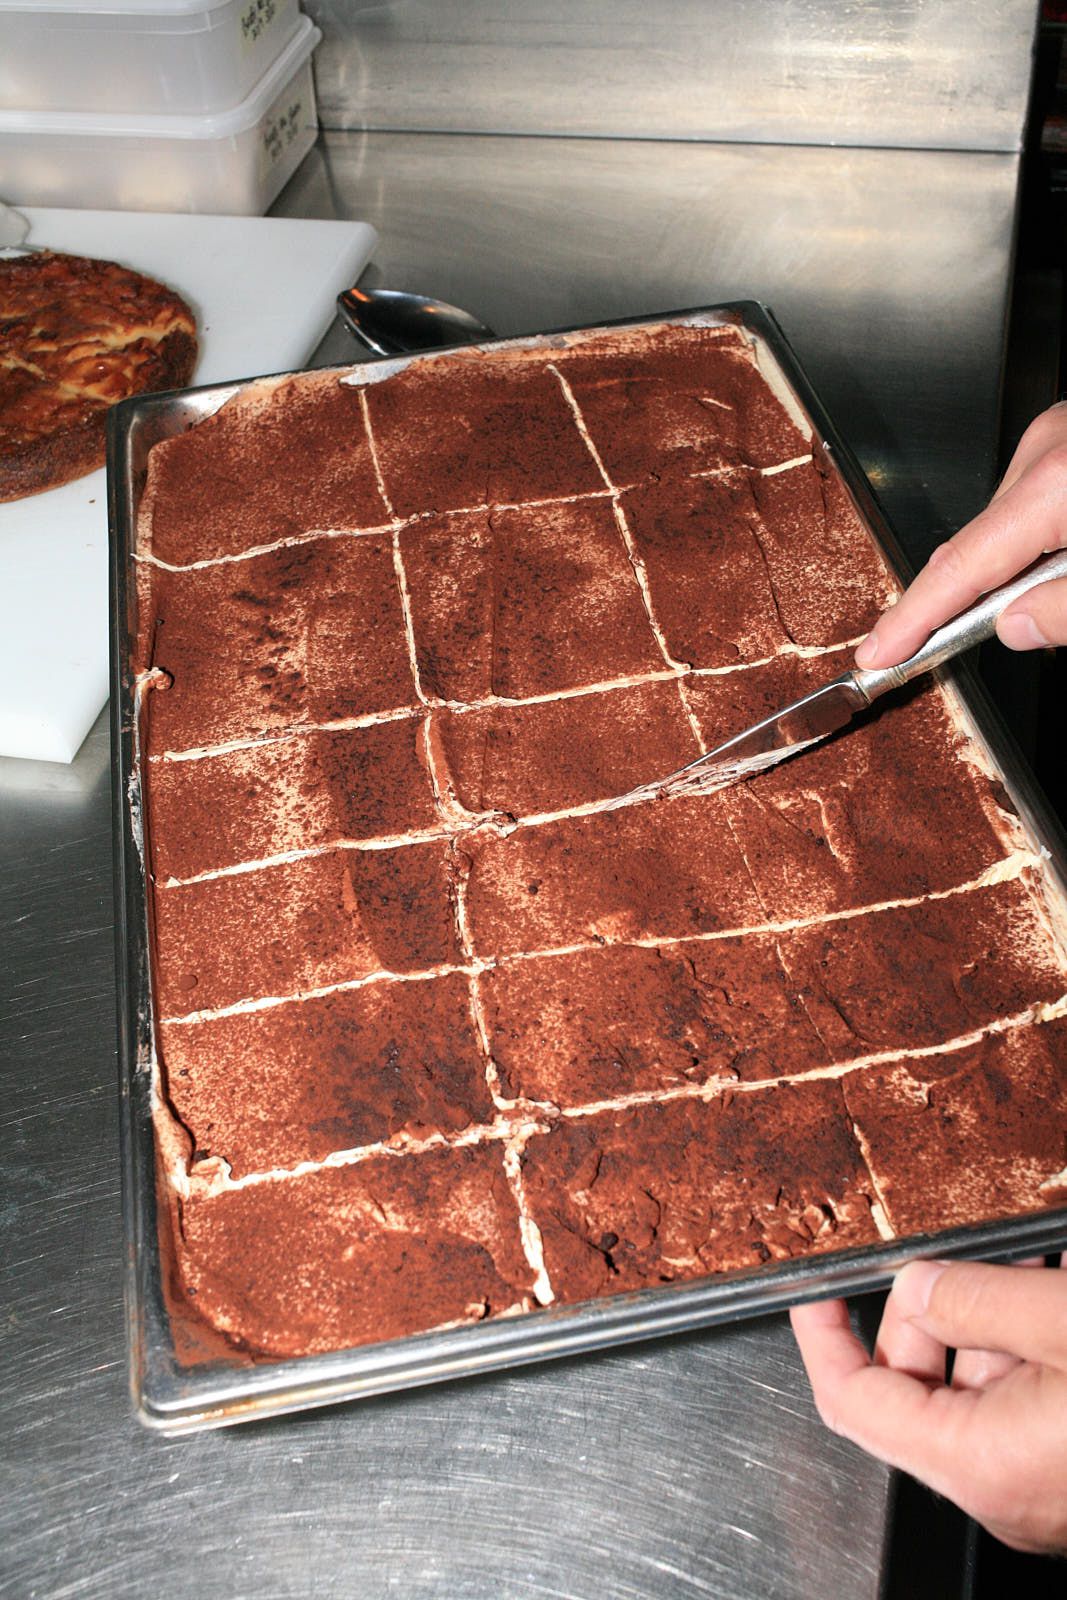 The tiramisù is marked into portions with a knife.